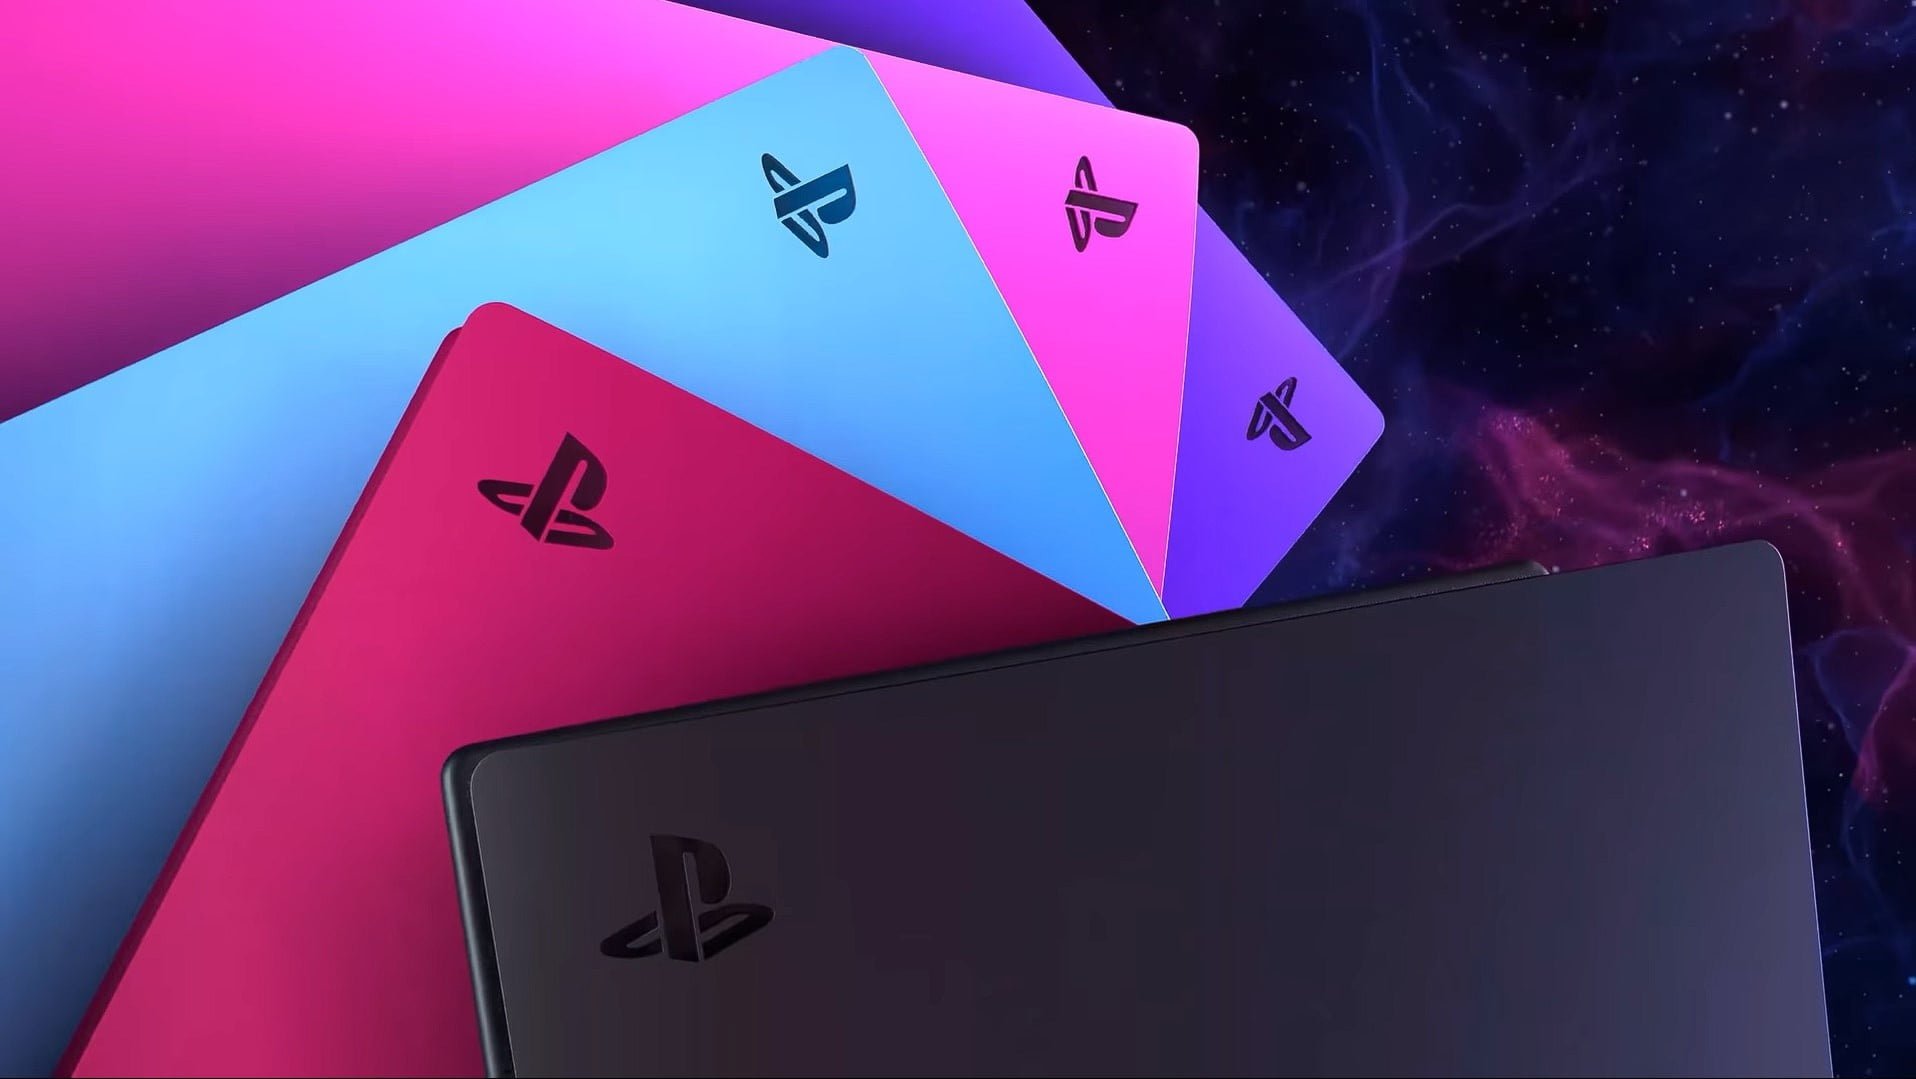 Official Ps5 Faceplates